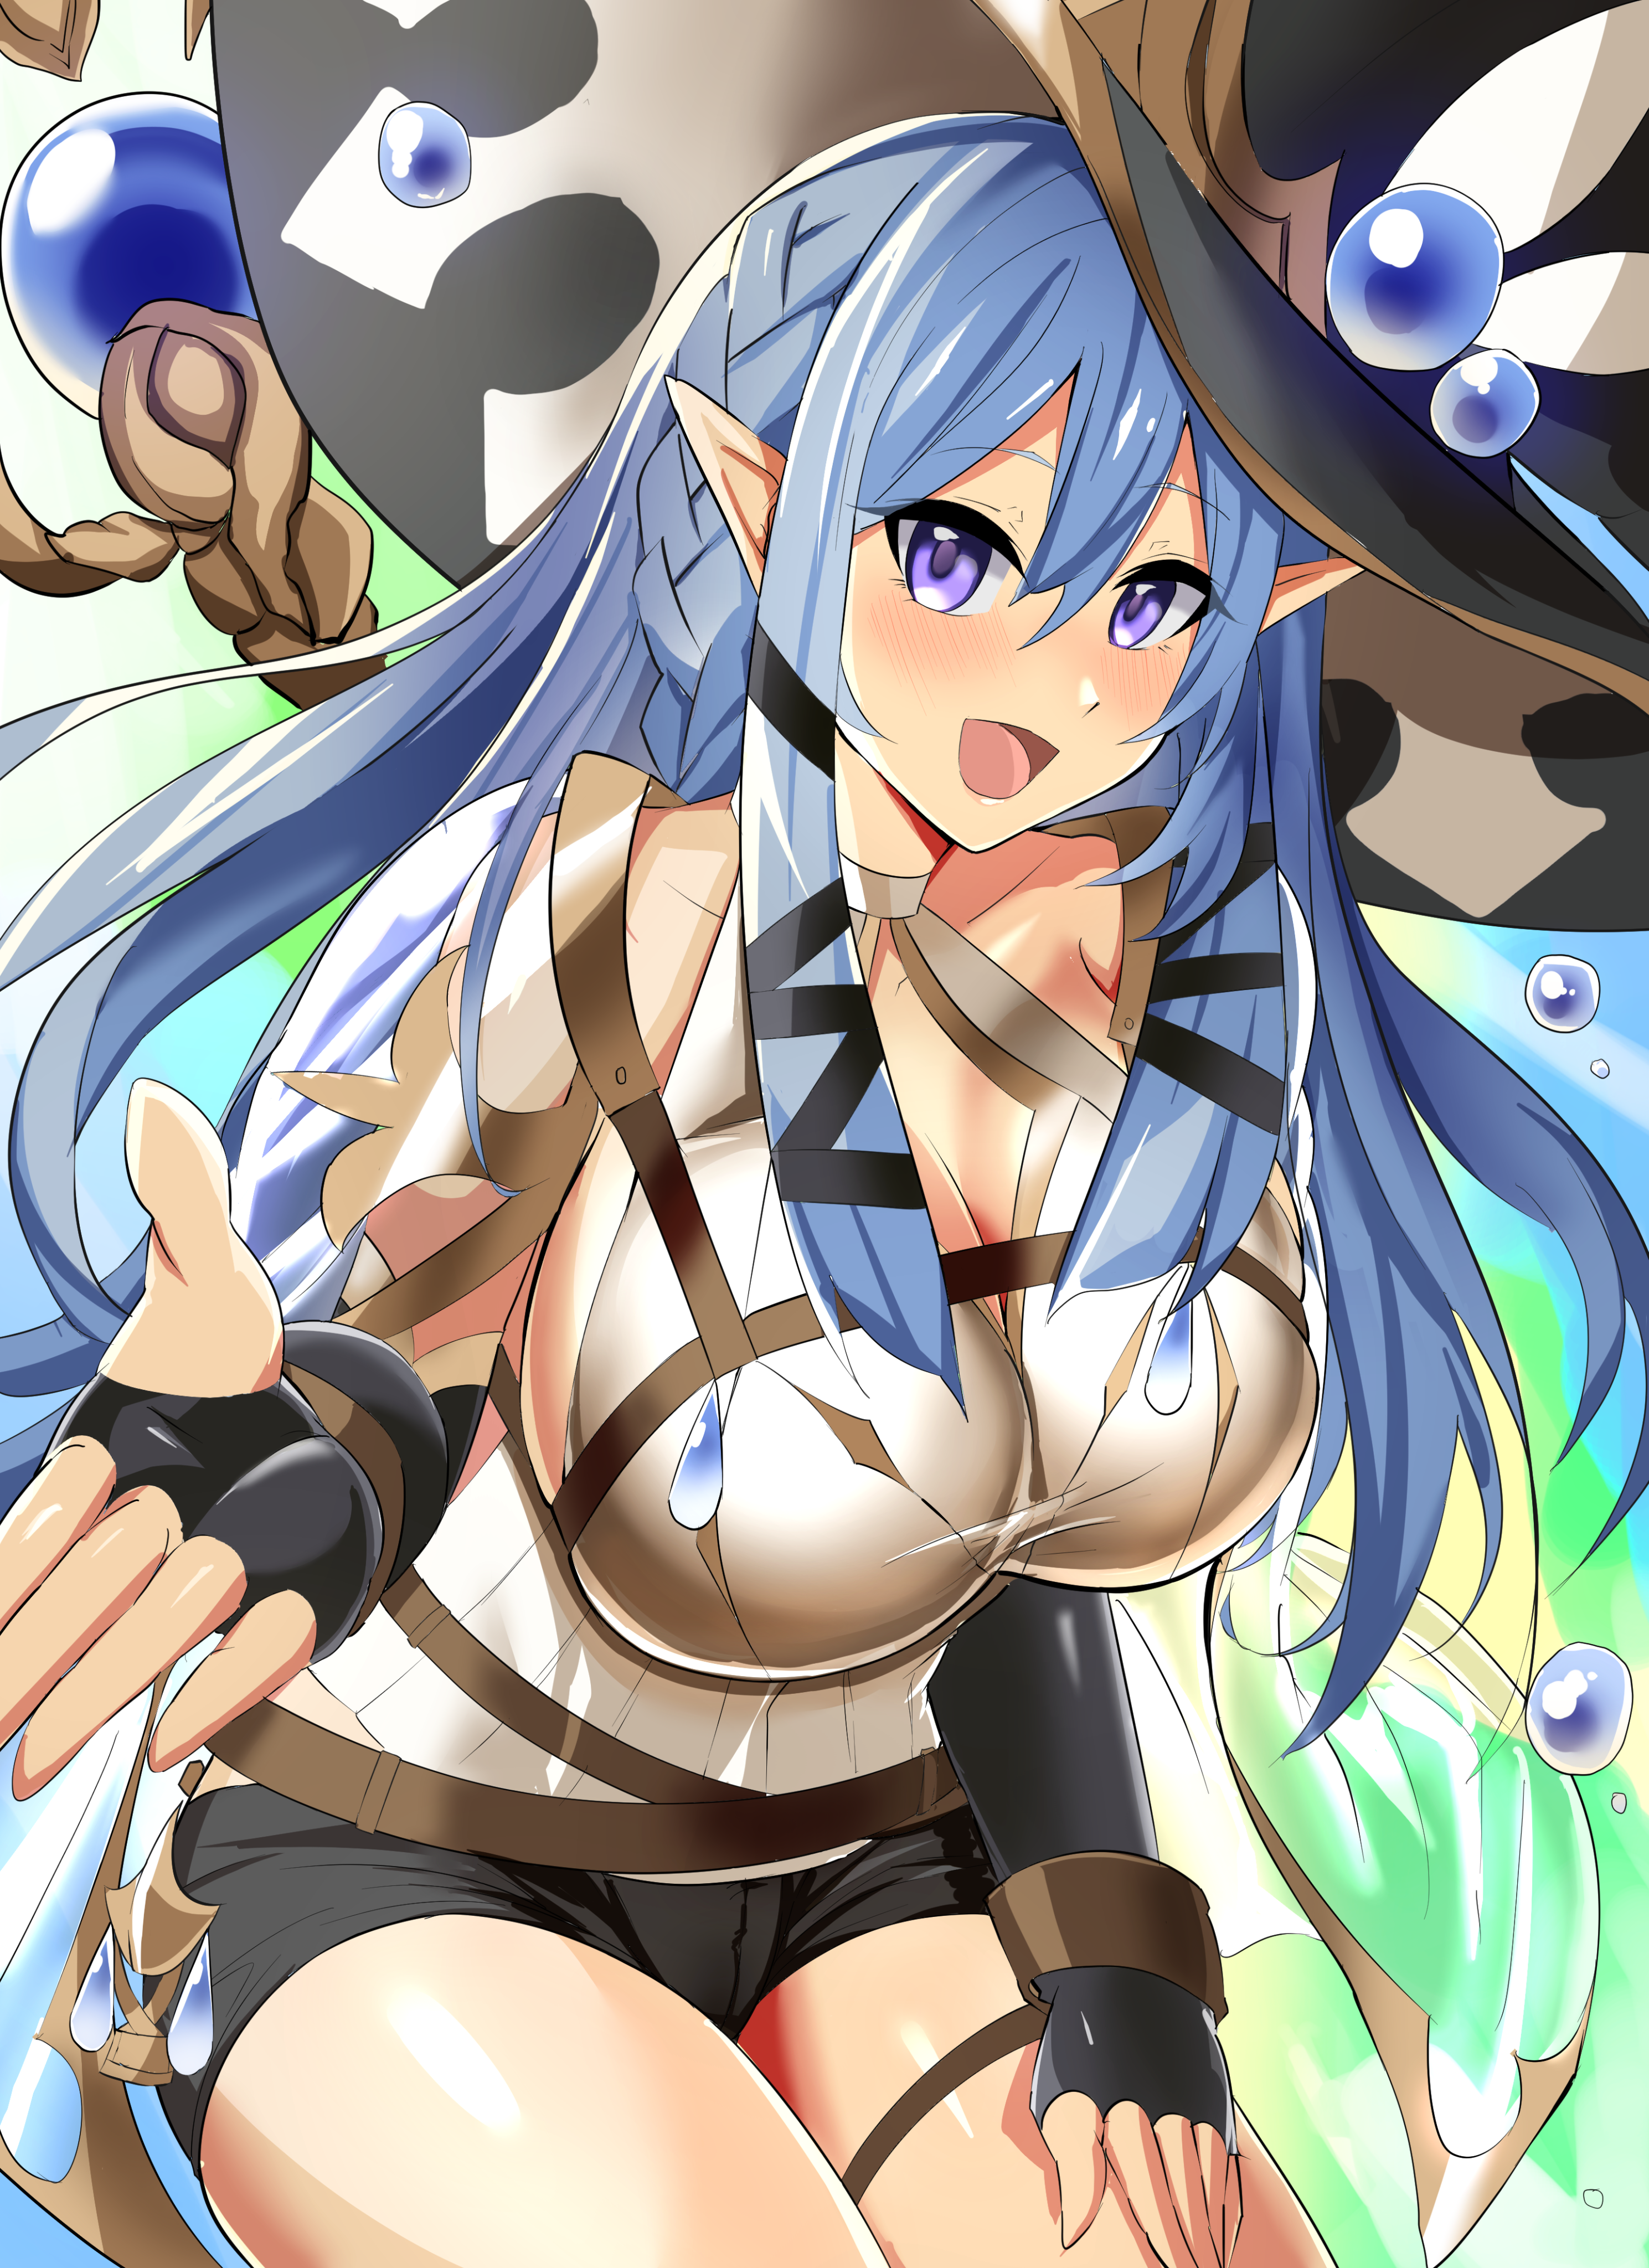 Anime 2978x4096 Water Enchantress of the Temple anime anime girls Trading Card Games Yu-Gi-Oh! long hair blue hair artwork digital art fan art arms reaching big boobs bare shoulders blue eyes hair between eyes gloves fingerless gloves leg ring collarbone cleavage looking at viewer thighs open mouth witch hat staff elbow gloves hand on thigh sidelocks